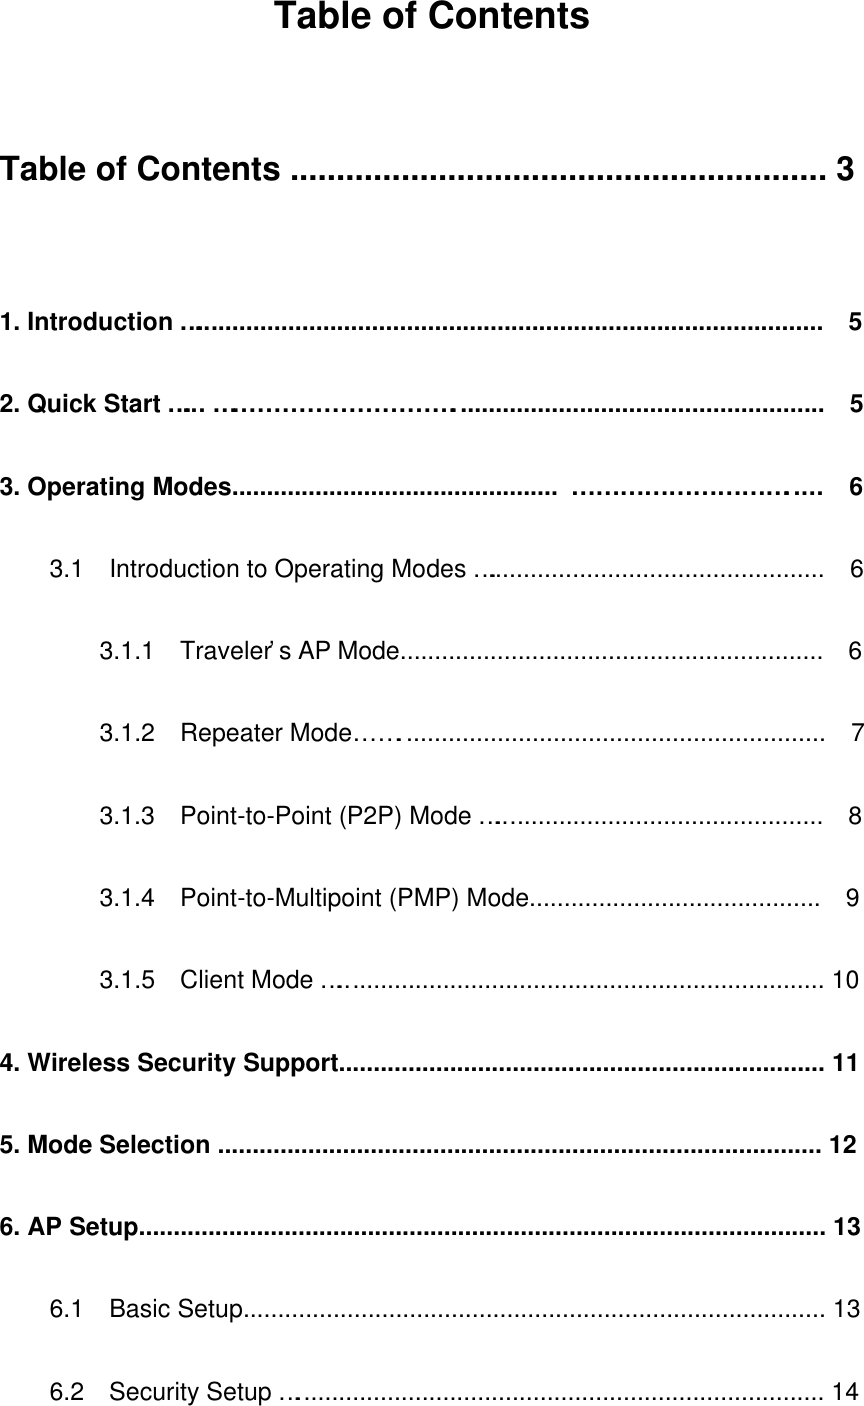 Table of Contents   Table of Contents .......................................................... 3  1. Introduction…..........................................................................................  5 2. Quick Start…... ………………………….....................................................  5 3. Operating Modes............................................... ……………………….....  6 3.1  Introduction to Operating Modes…................................................  6 3.1.1  Traveler’s AP Mode.............................................................  6 3.1.2  Repeater Mode…….............................................................   7 3.1.3  Point-to-Point (P2P) Mode…...............................................  8 3.1.4  Point-to-Multipoint (PMP) Mode..........................................   9 3.1.5  Client Mode…...................................................................... 10 4. Wireless Security Support...................................................................... 11 5. Mode Selection ....................................................................................... 12 6. AP Setup................................................................................................... 13 6.1  Basic Setup.................................................................................... 13 6.2  Security Setup…............................................................................ 14 